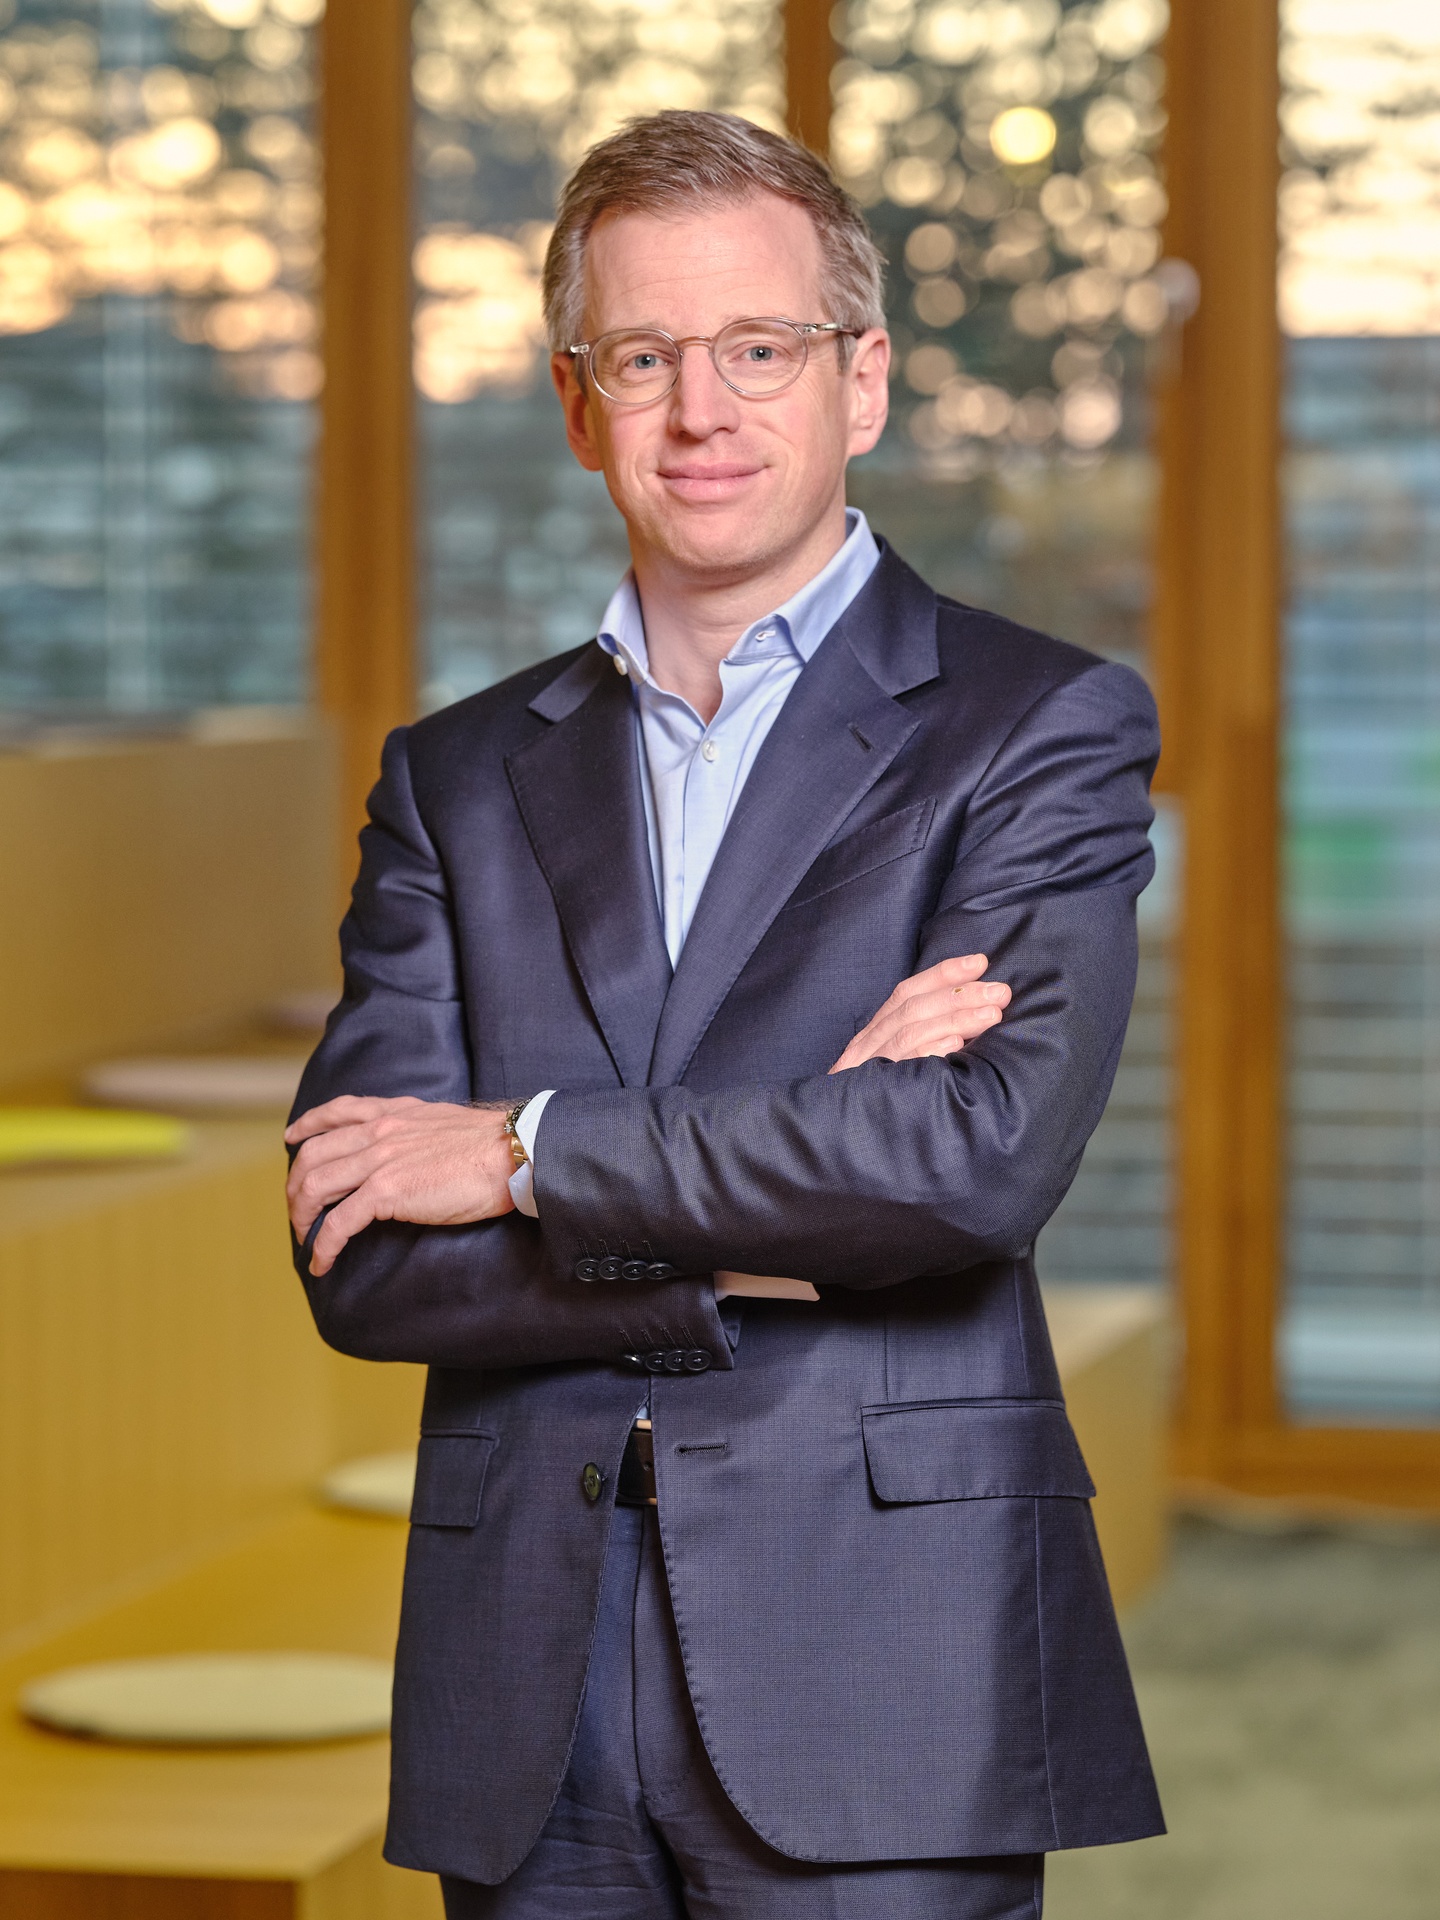 MOUSEL François, PwC Luxembourg